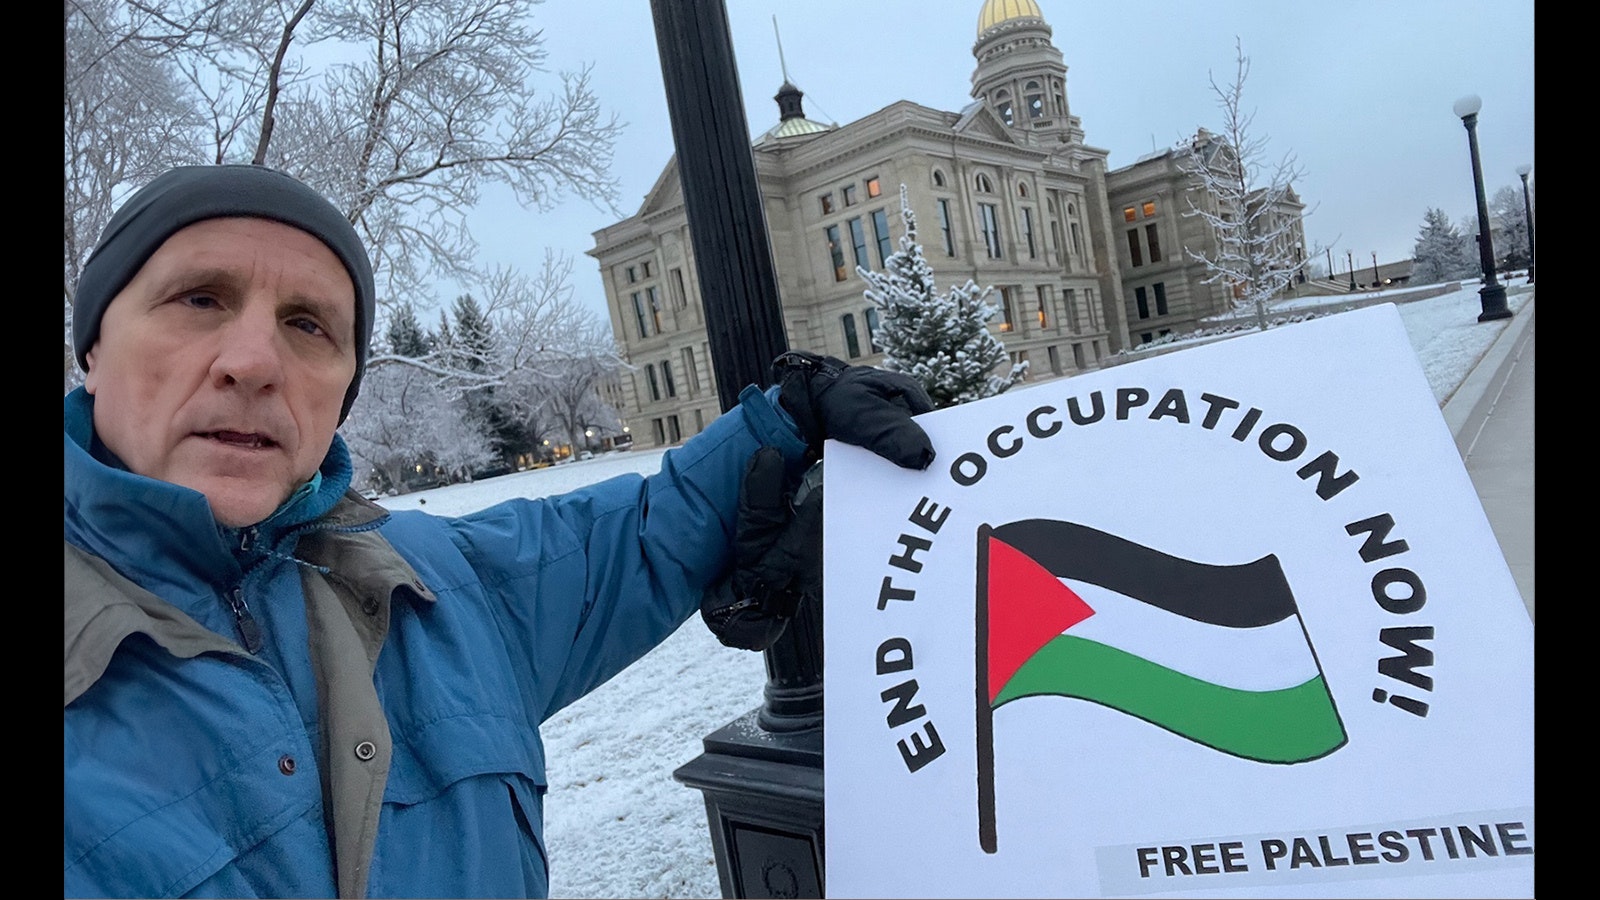 Wyoming native Larry McIlvaine now lives in Jordan, but spent part of his visit back in the Cowboy State last week demonstrating for Palestine at the Capitol in Cheyenne.